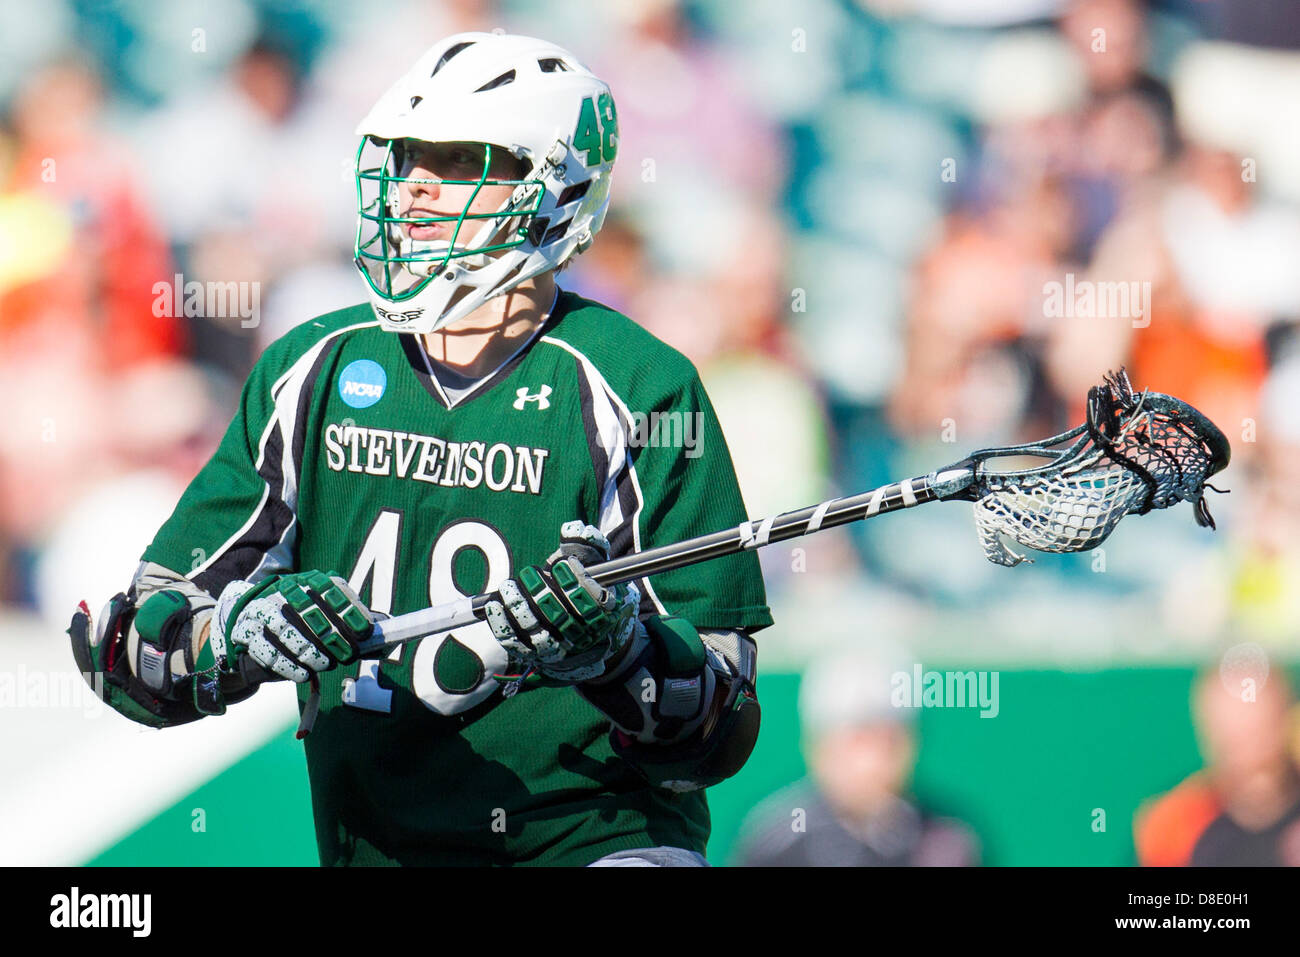 May 26 13 Stevenson Mustangs Attack Tyler Reid 48 In Action With The Ball During The Ncaa Division Iii Championship Lacrosse Match Between Stevenson Mustangs And Rit Tigers At Lincoln Financial Field